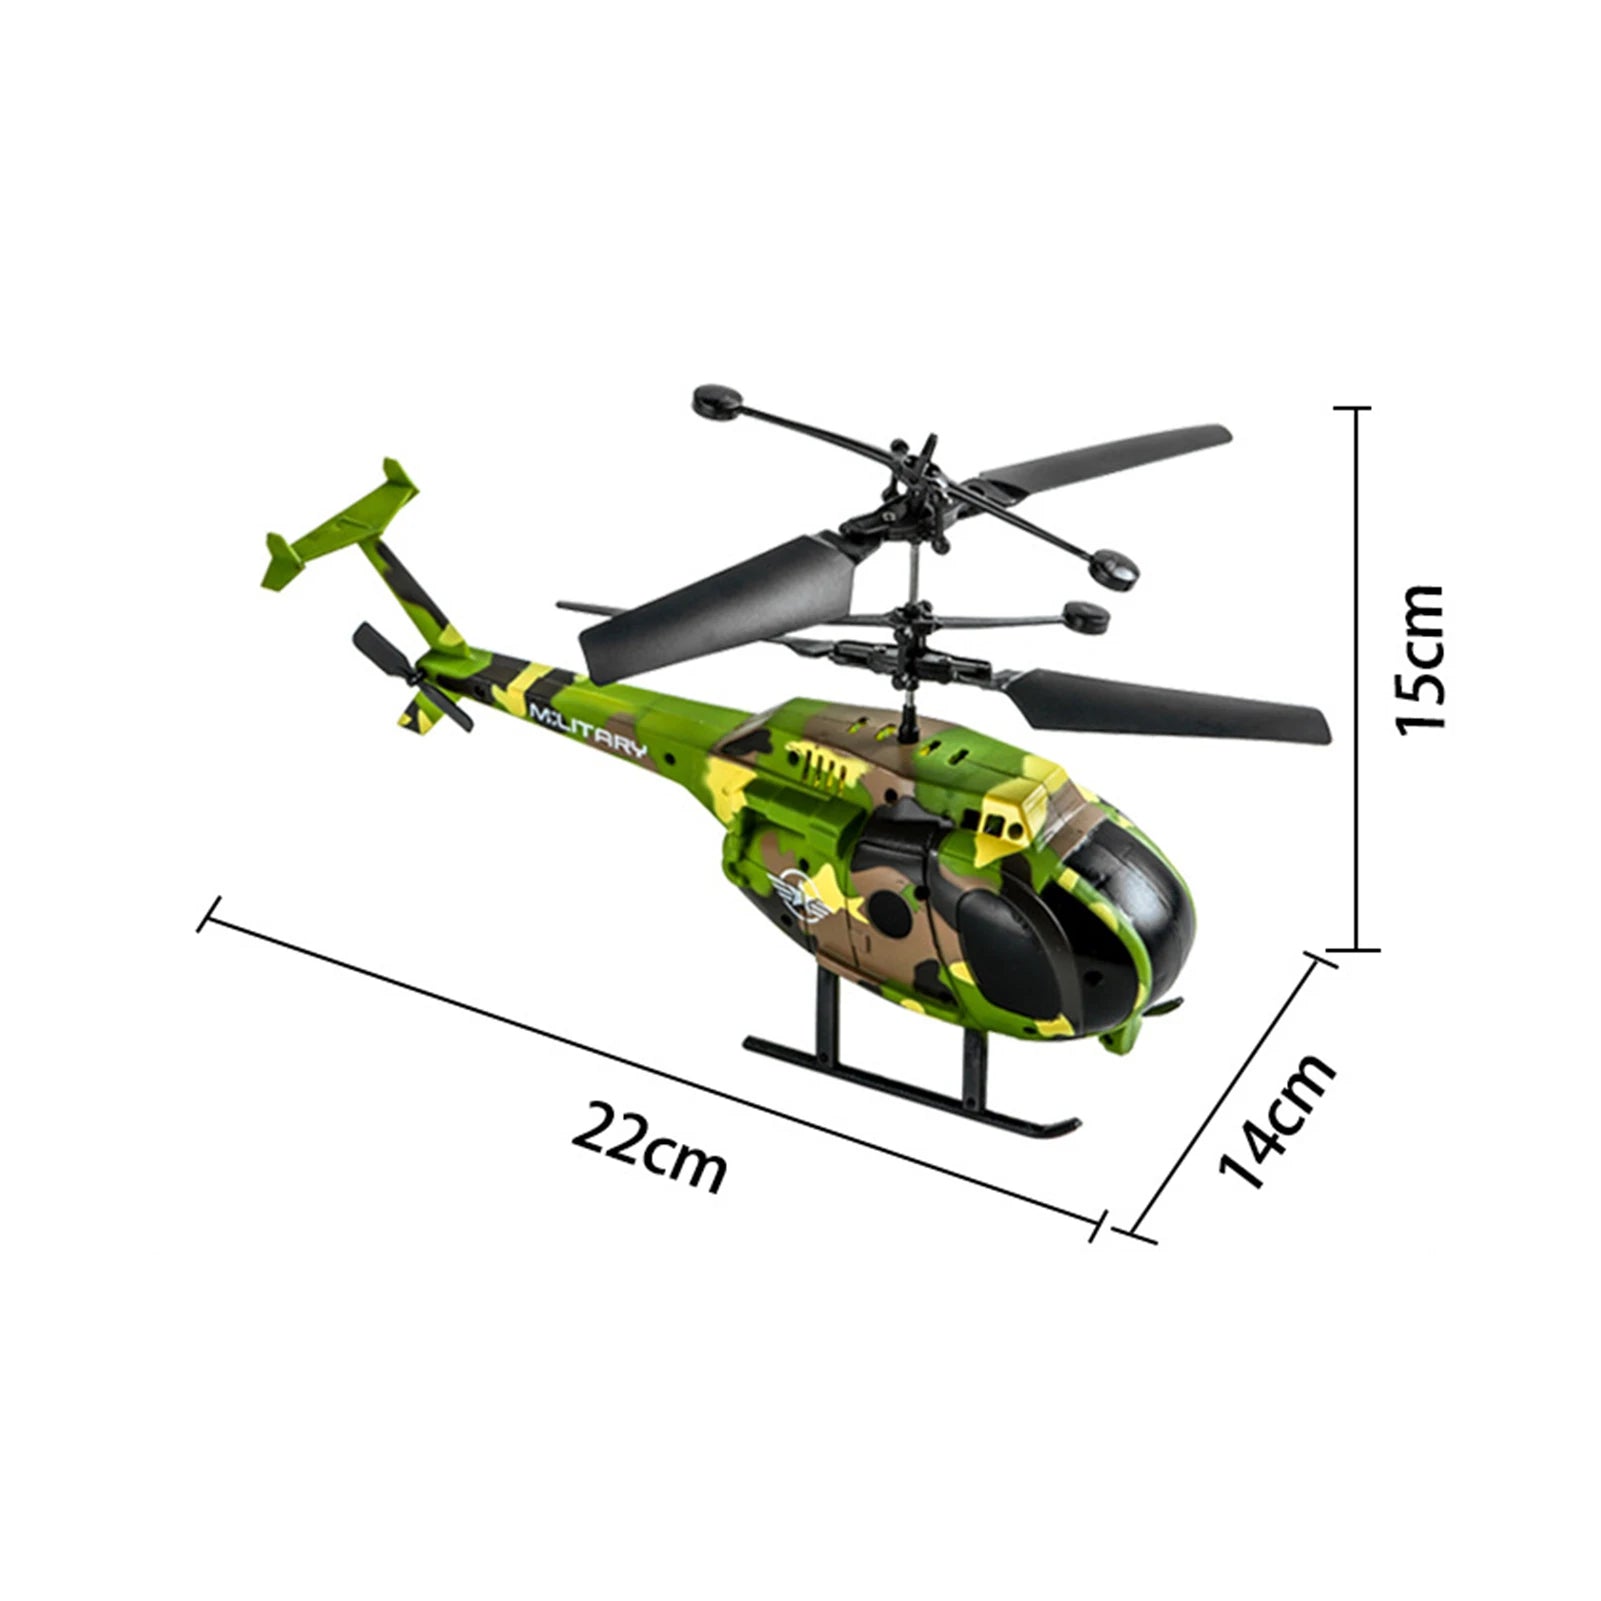 C135 RC Helicopter, the toy aircraft is with exquisite paint and bright color, which has fine craftsmanship and realistic appearance